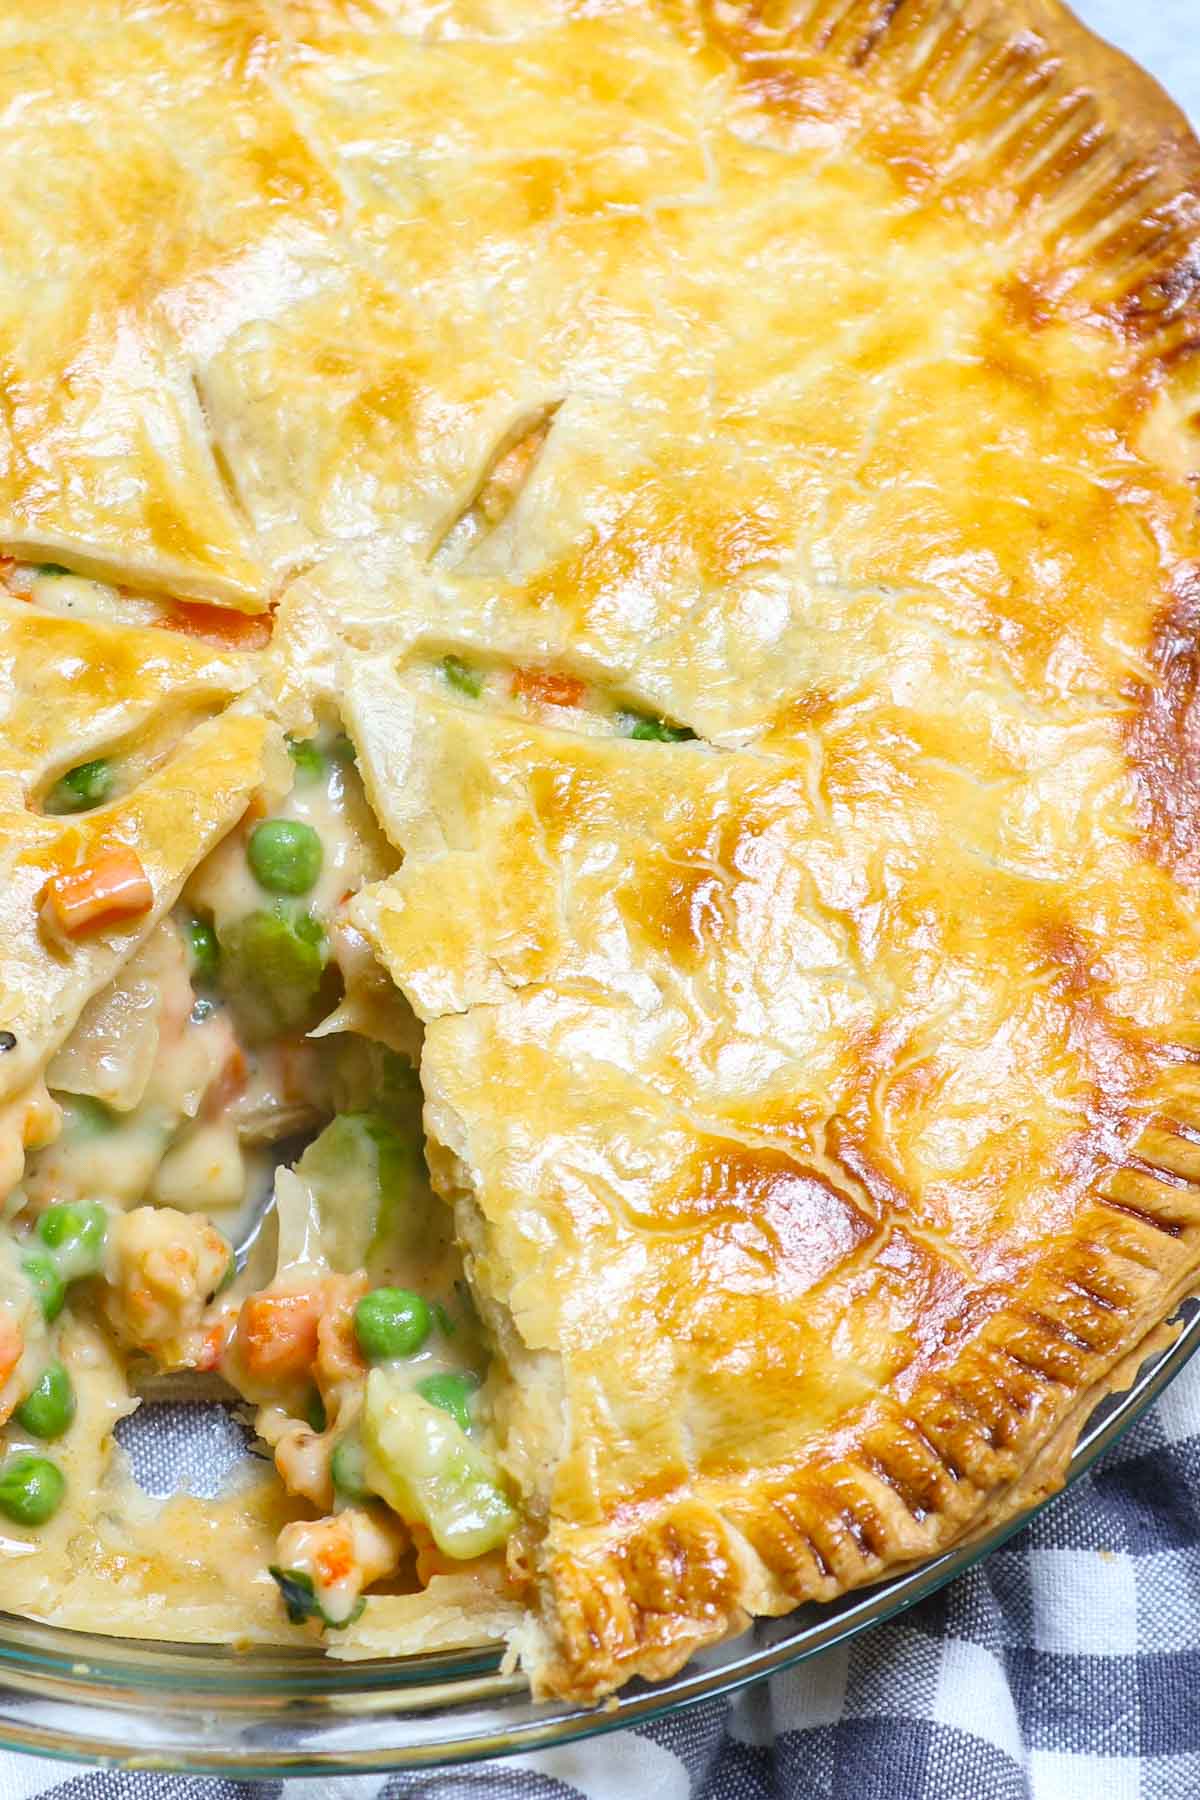 Crawfish Pie is the ultimate comfort food in Louisiana! This famous Cajun dish is a delicious, flaky crawfish pot pie loaded with succulent crawfish tail meat and fresh veggies. It takes just a few ingredients to make a batch at home!